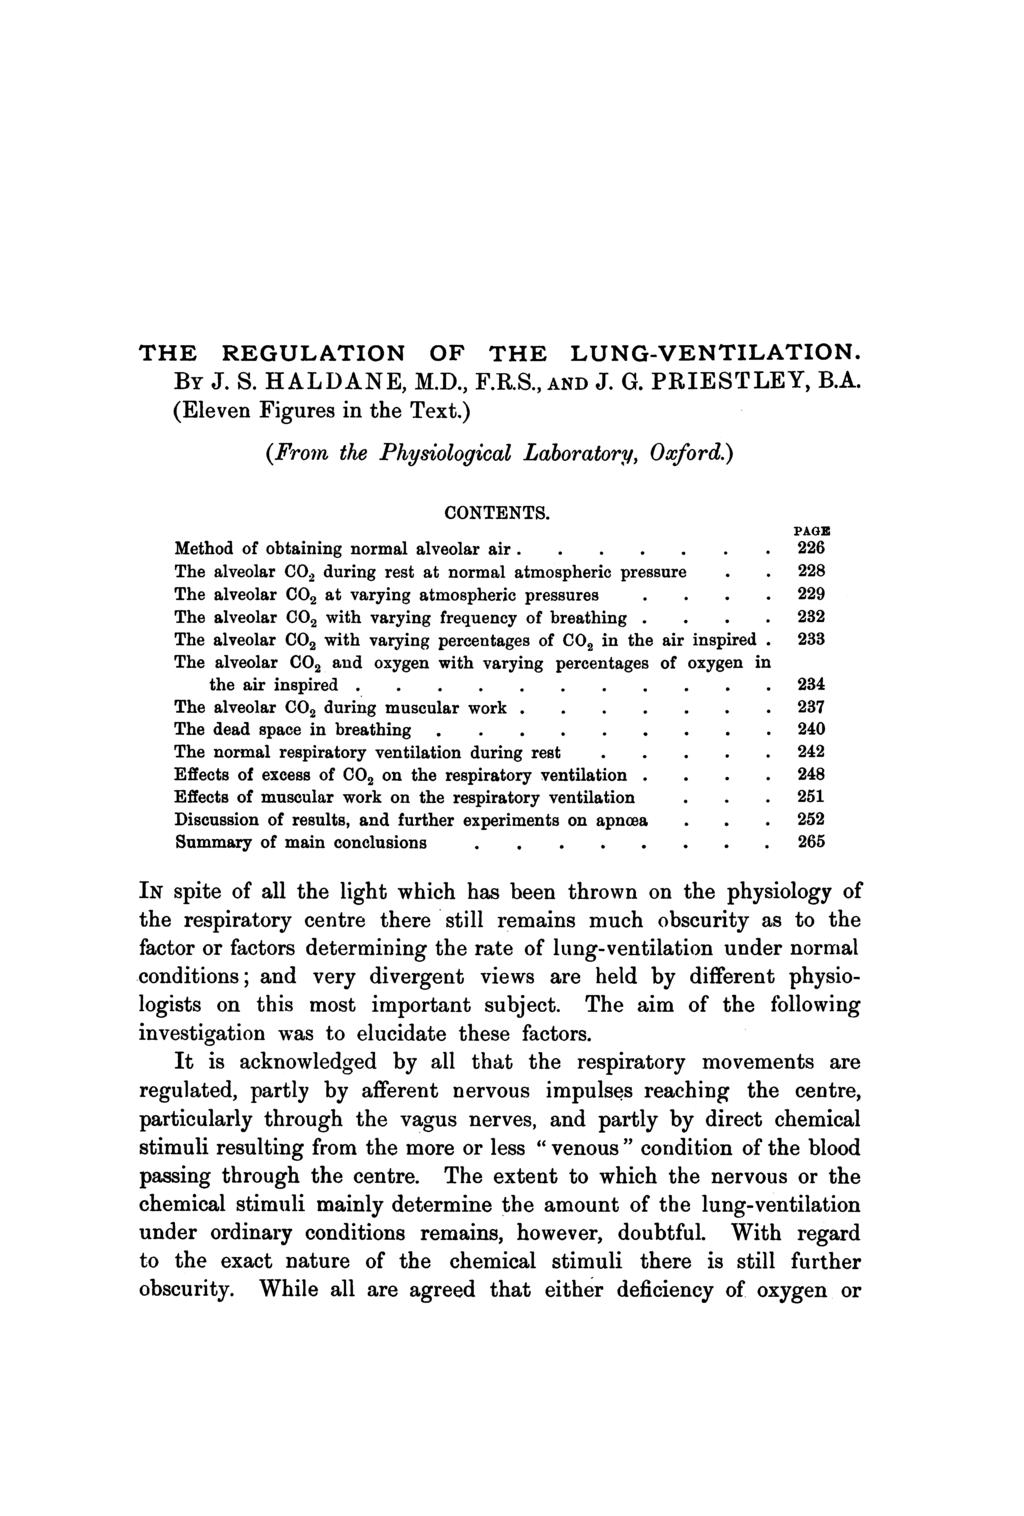 THE REGULATION OF THE LUNG-VENTILATION. BY J. S. HALDANE, M.D., F.R.S., AND J. G. PRIESTLEY, B.A. (Eleven Figures in the Text.) (From the Physiological Laboratory, Oxford.) CONTENTS.